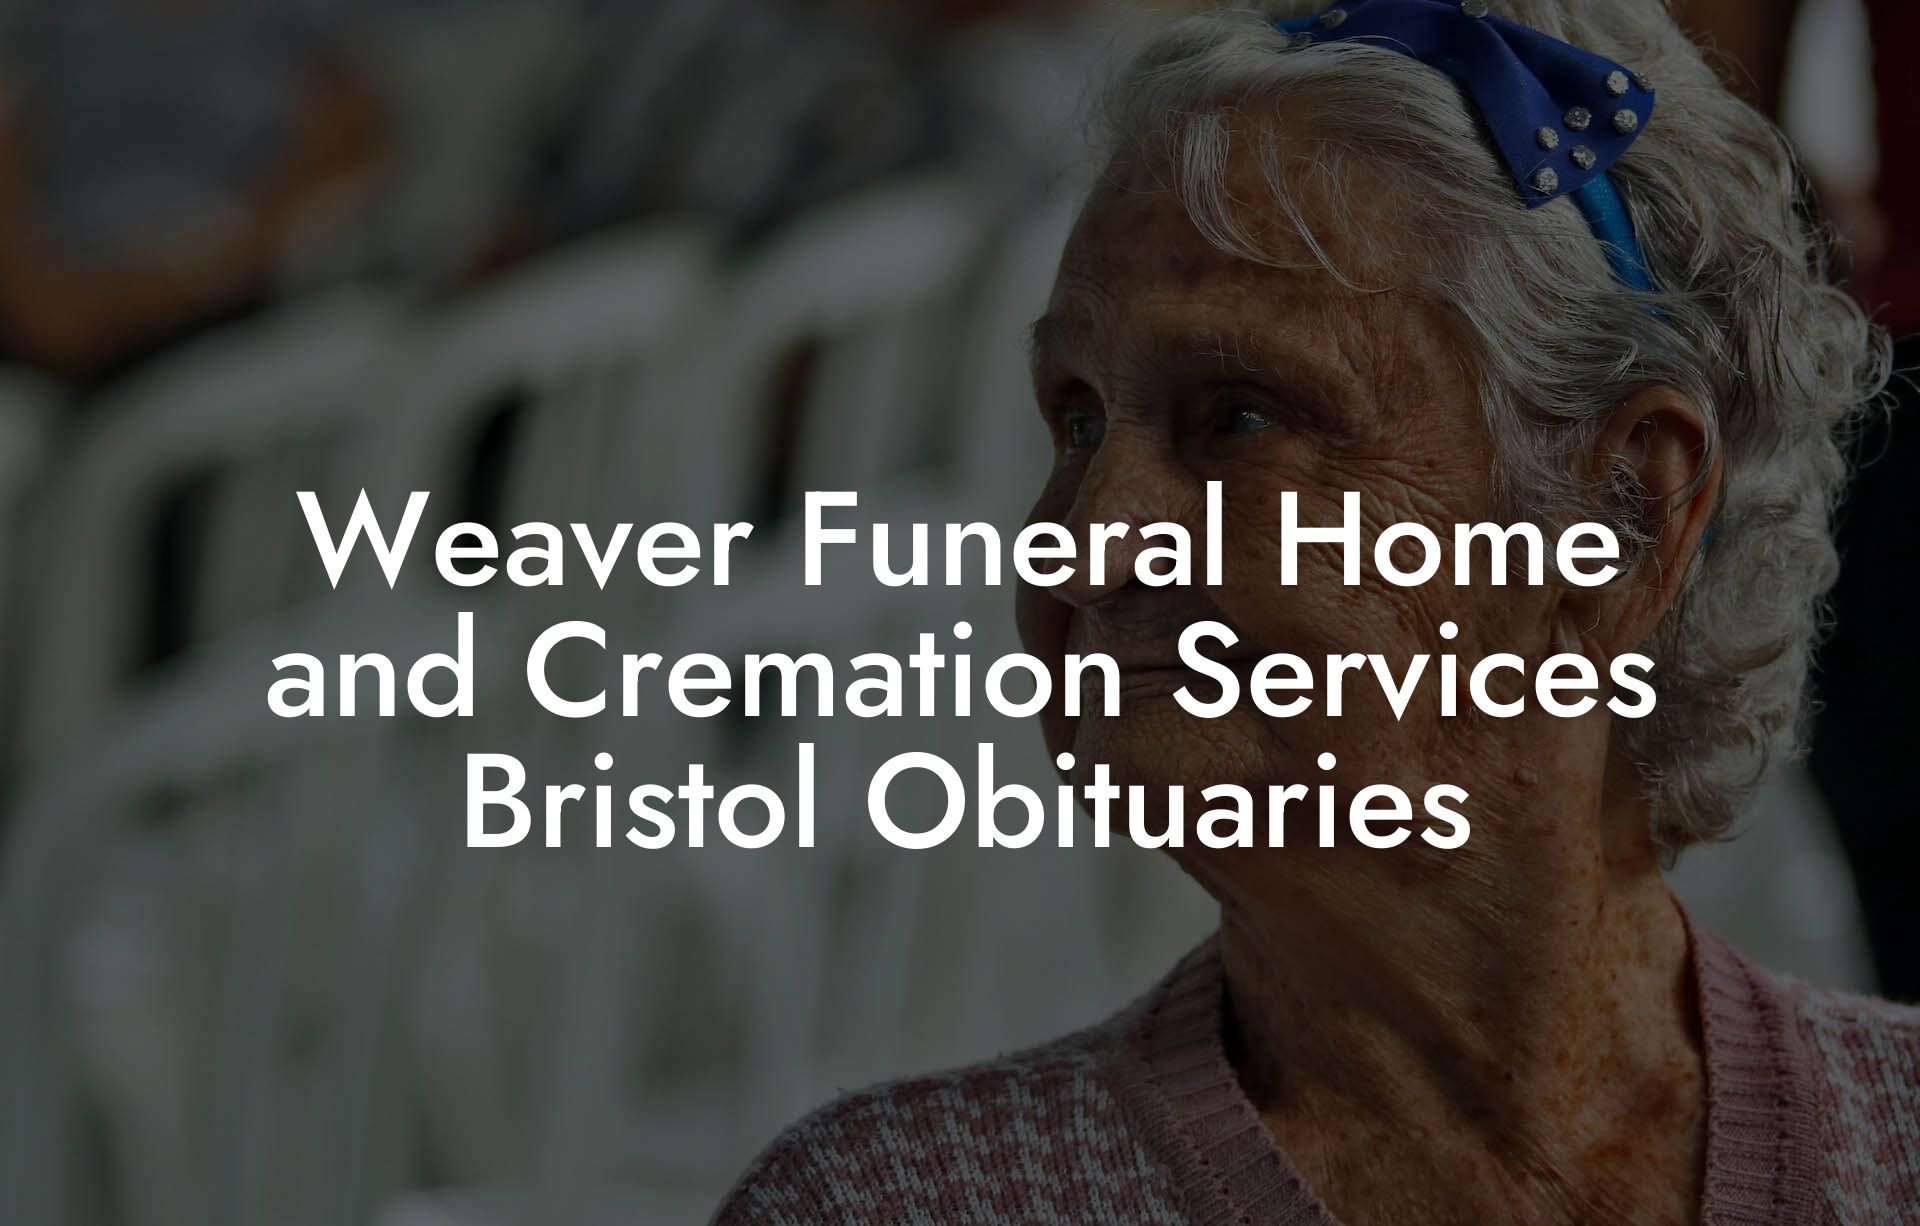 Weaver Funeral Home and Cremation Services Bristol Obituaries